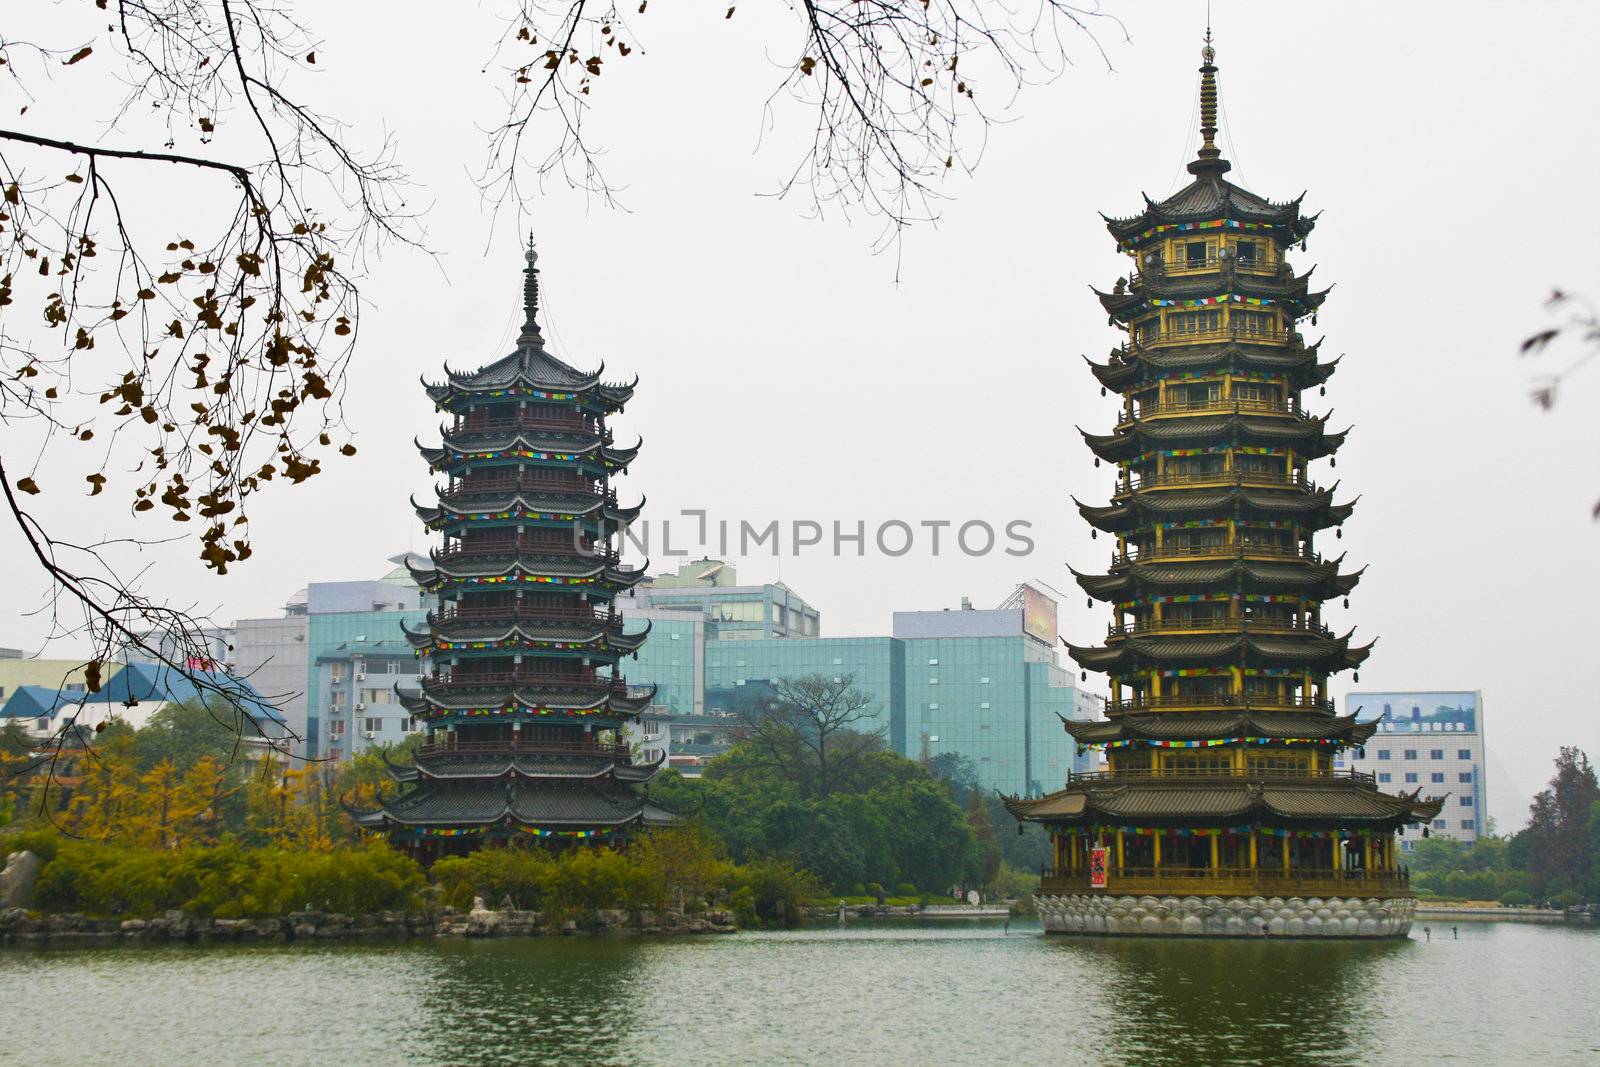 Chinese pagodas by kasto